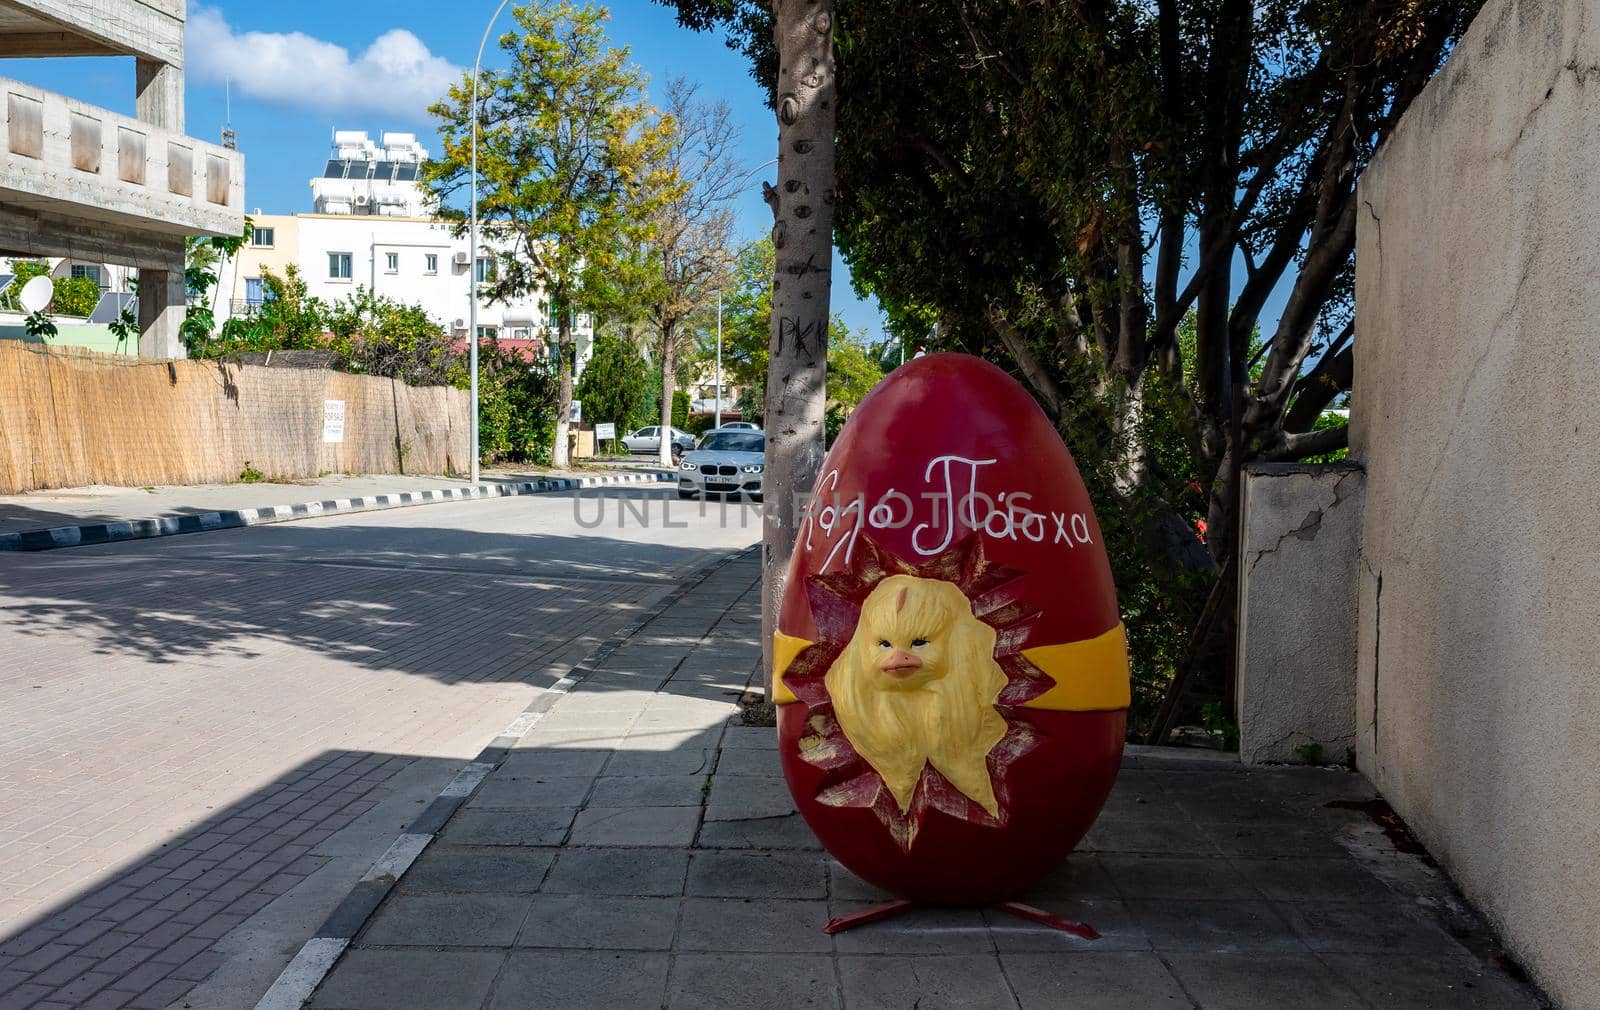 April 17, 2019 Polis, Cyprus. A huge Easter egg on one of the streets in the city of Polis.